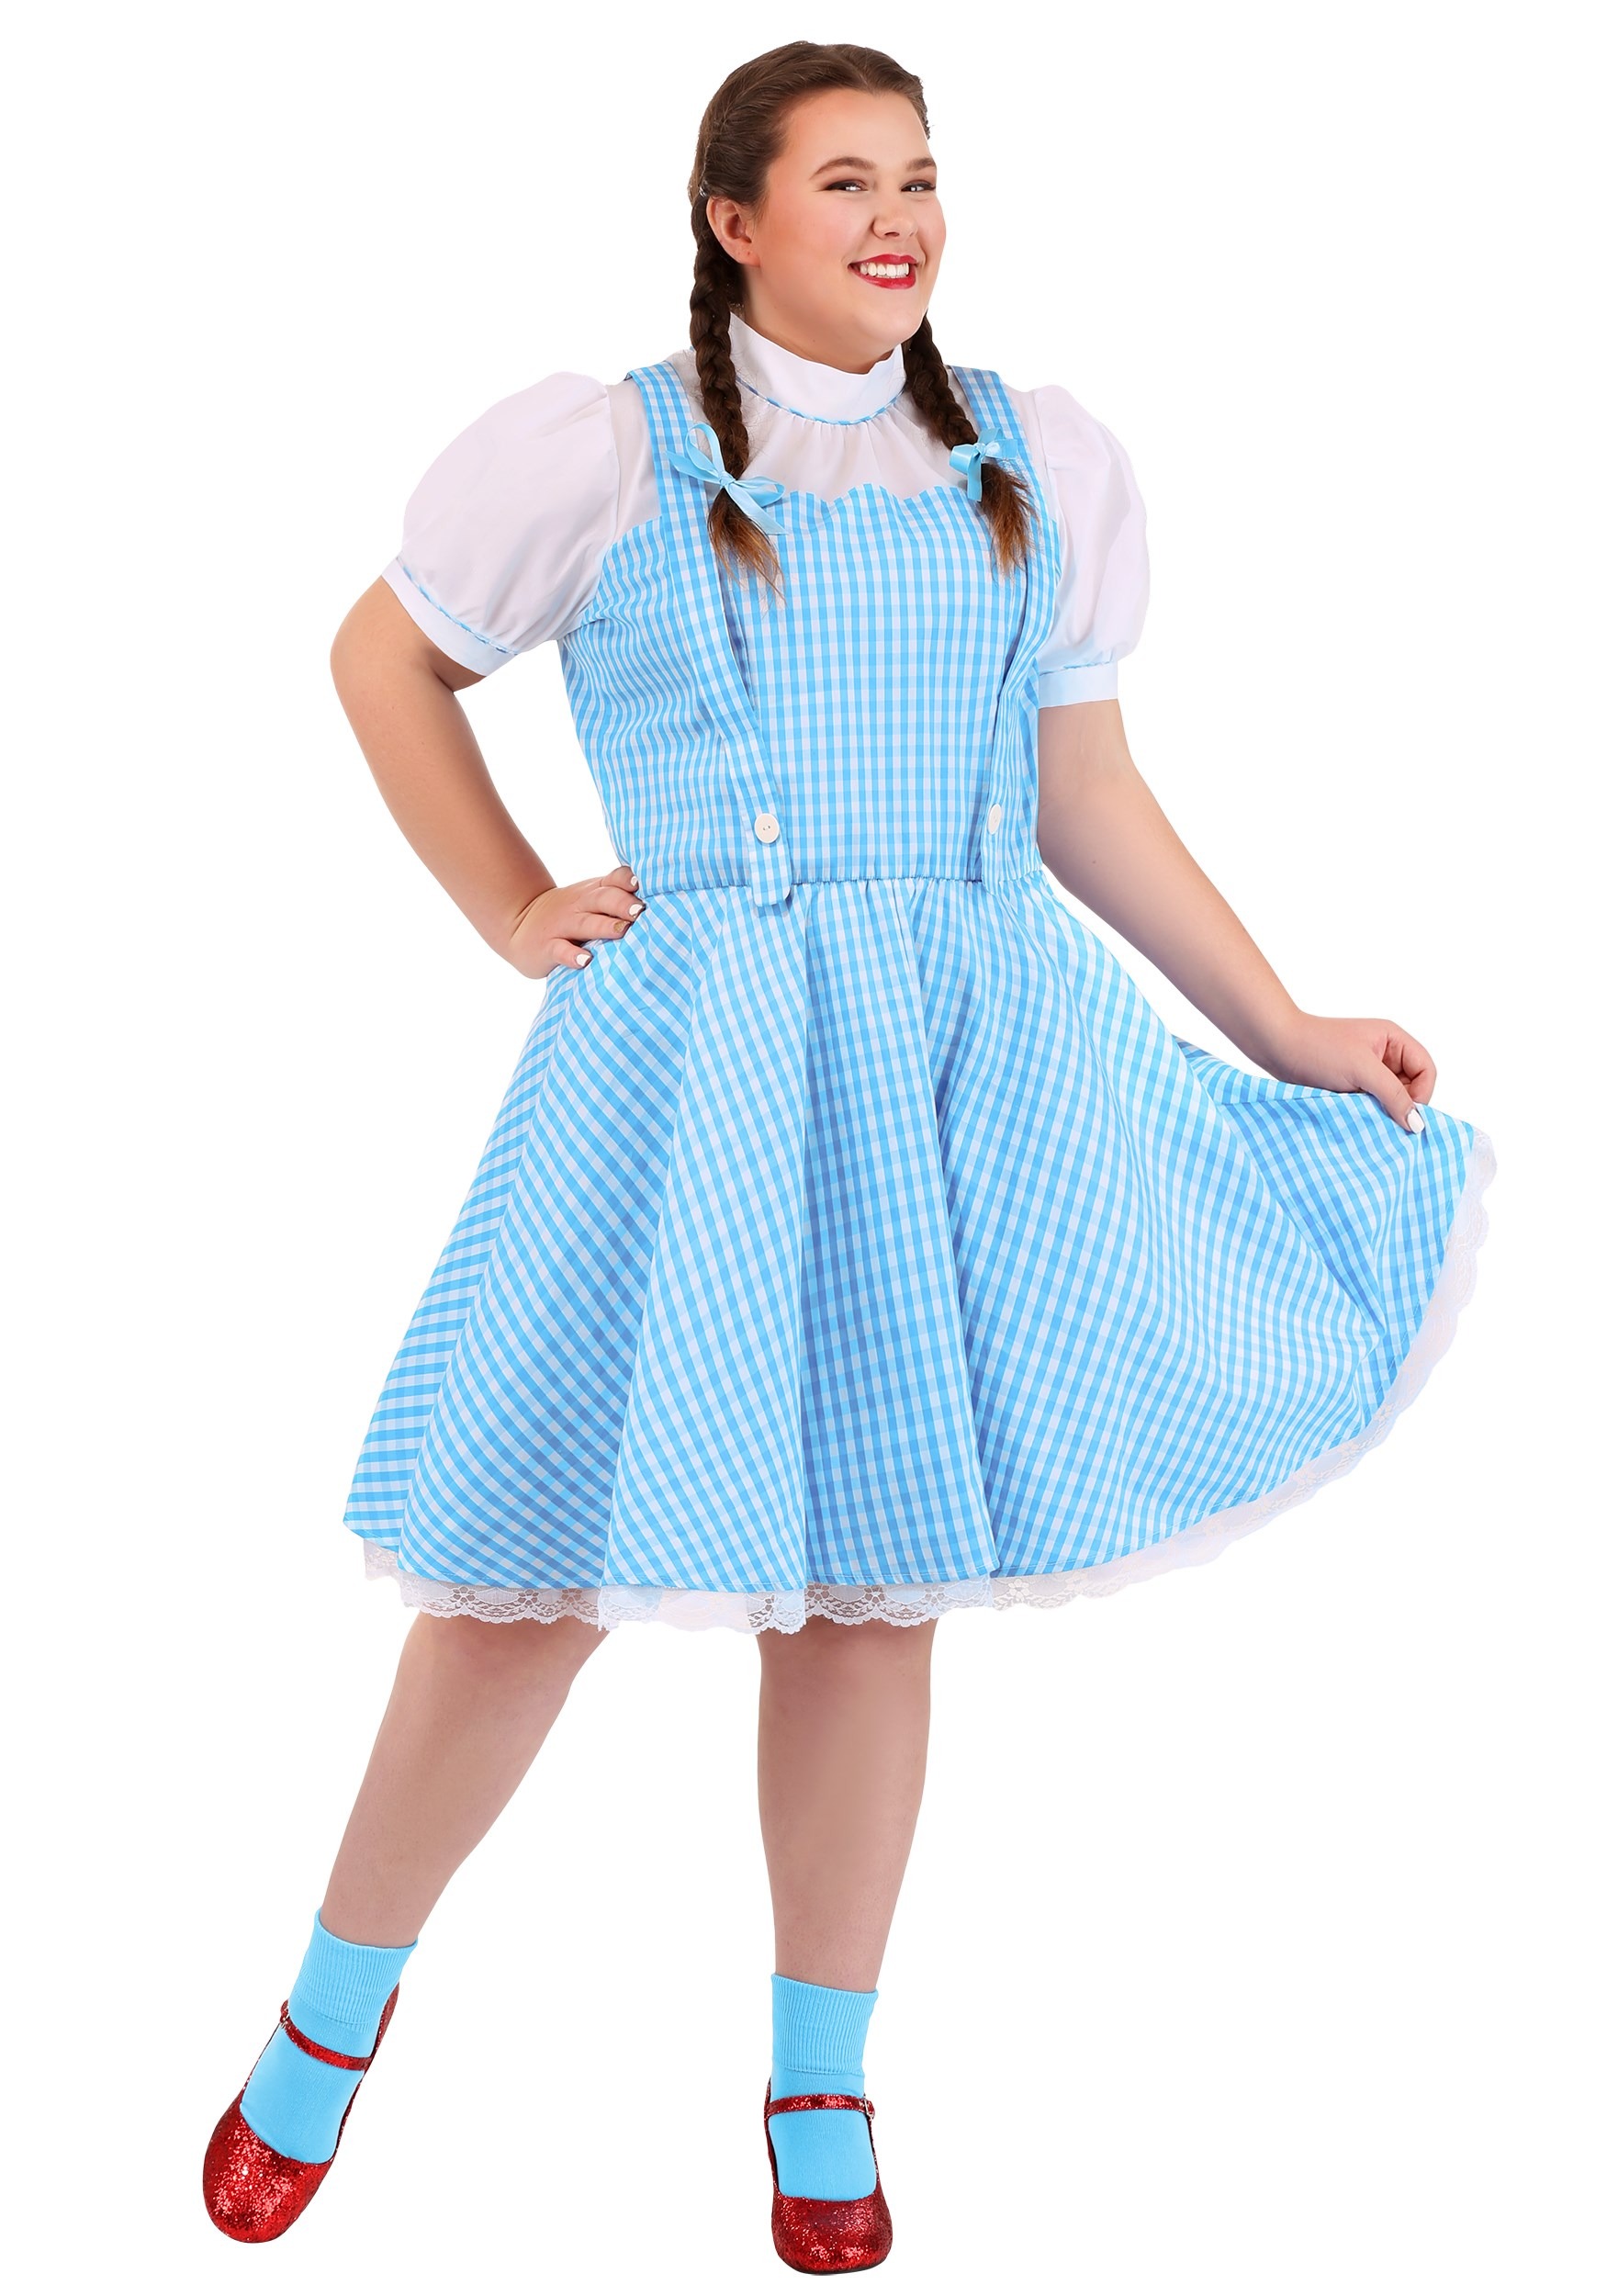 Photos - Fancy Dress Wizard Jerry Leigh Plus Size  of Oz Dorothy Costume for Women Blue/Whit 